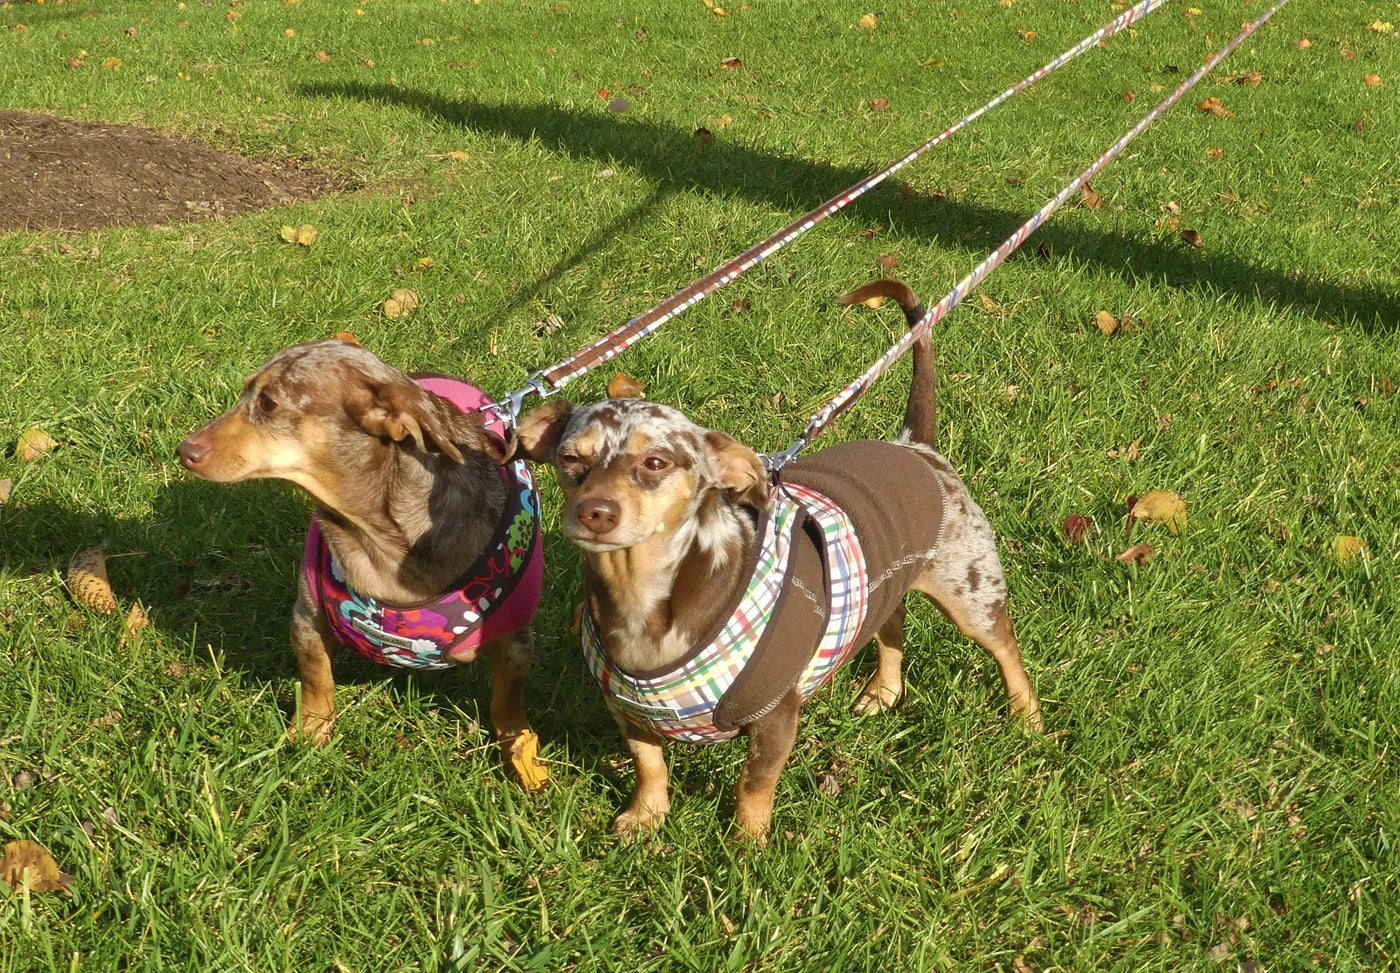 2 dogs with sweater sets and matching leads